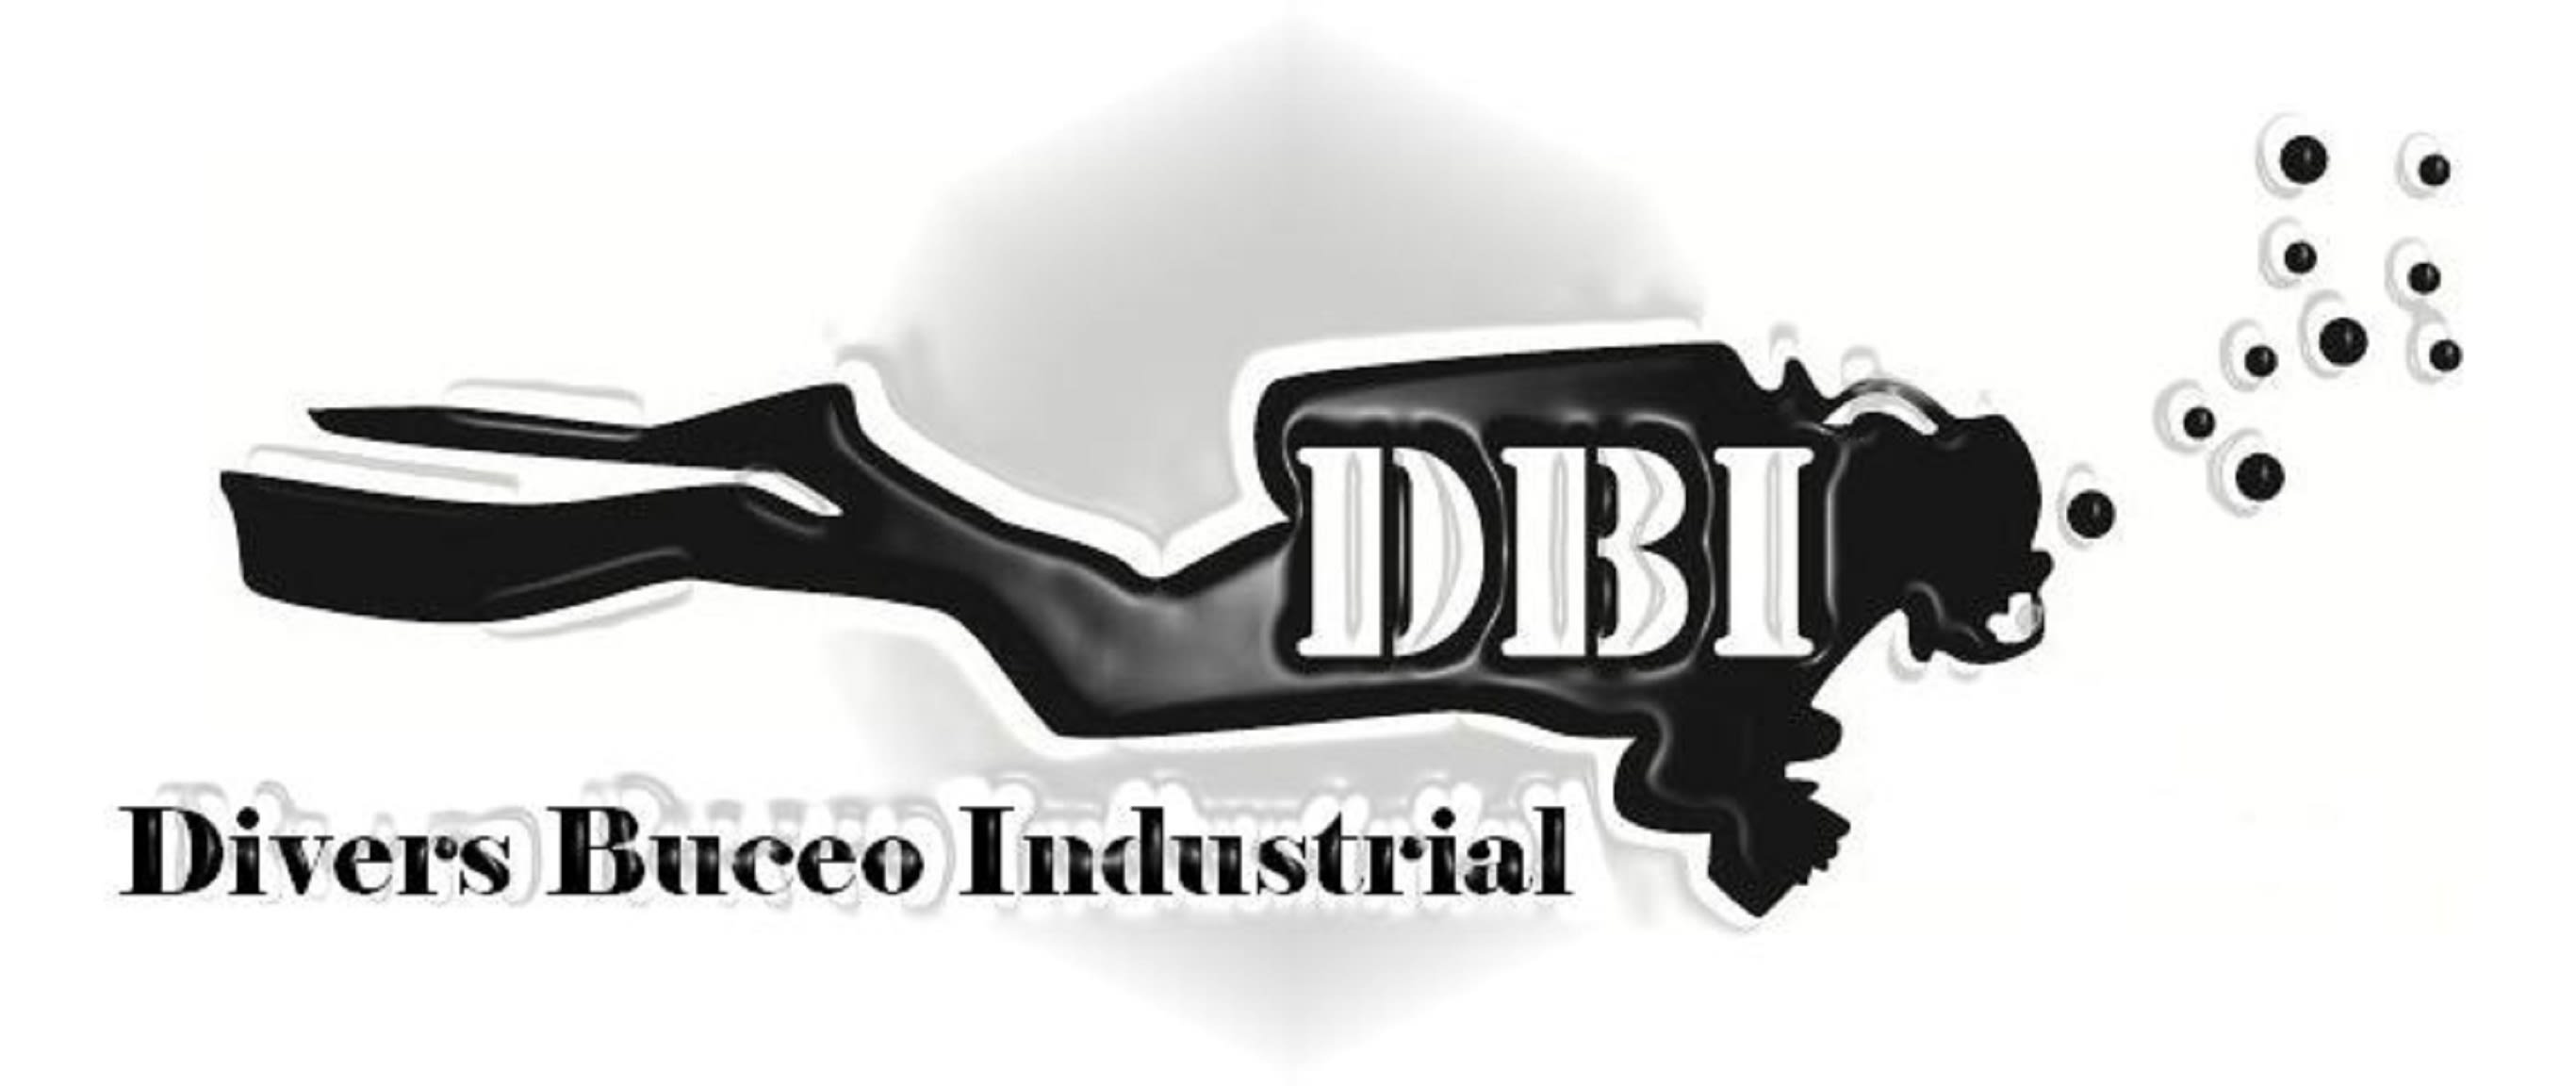 Divers buceo industrial